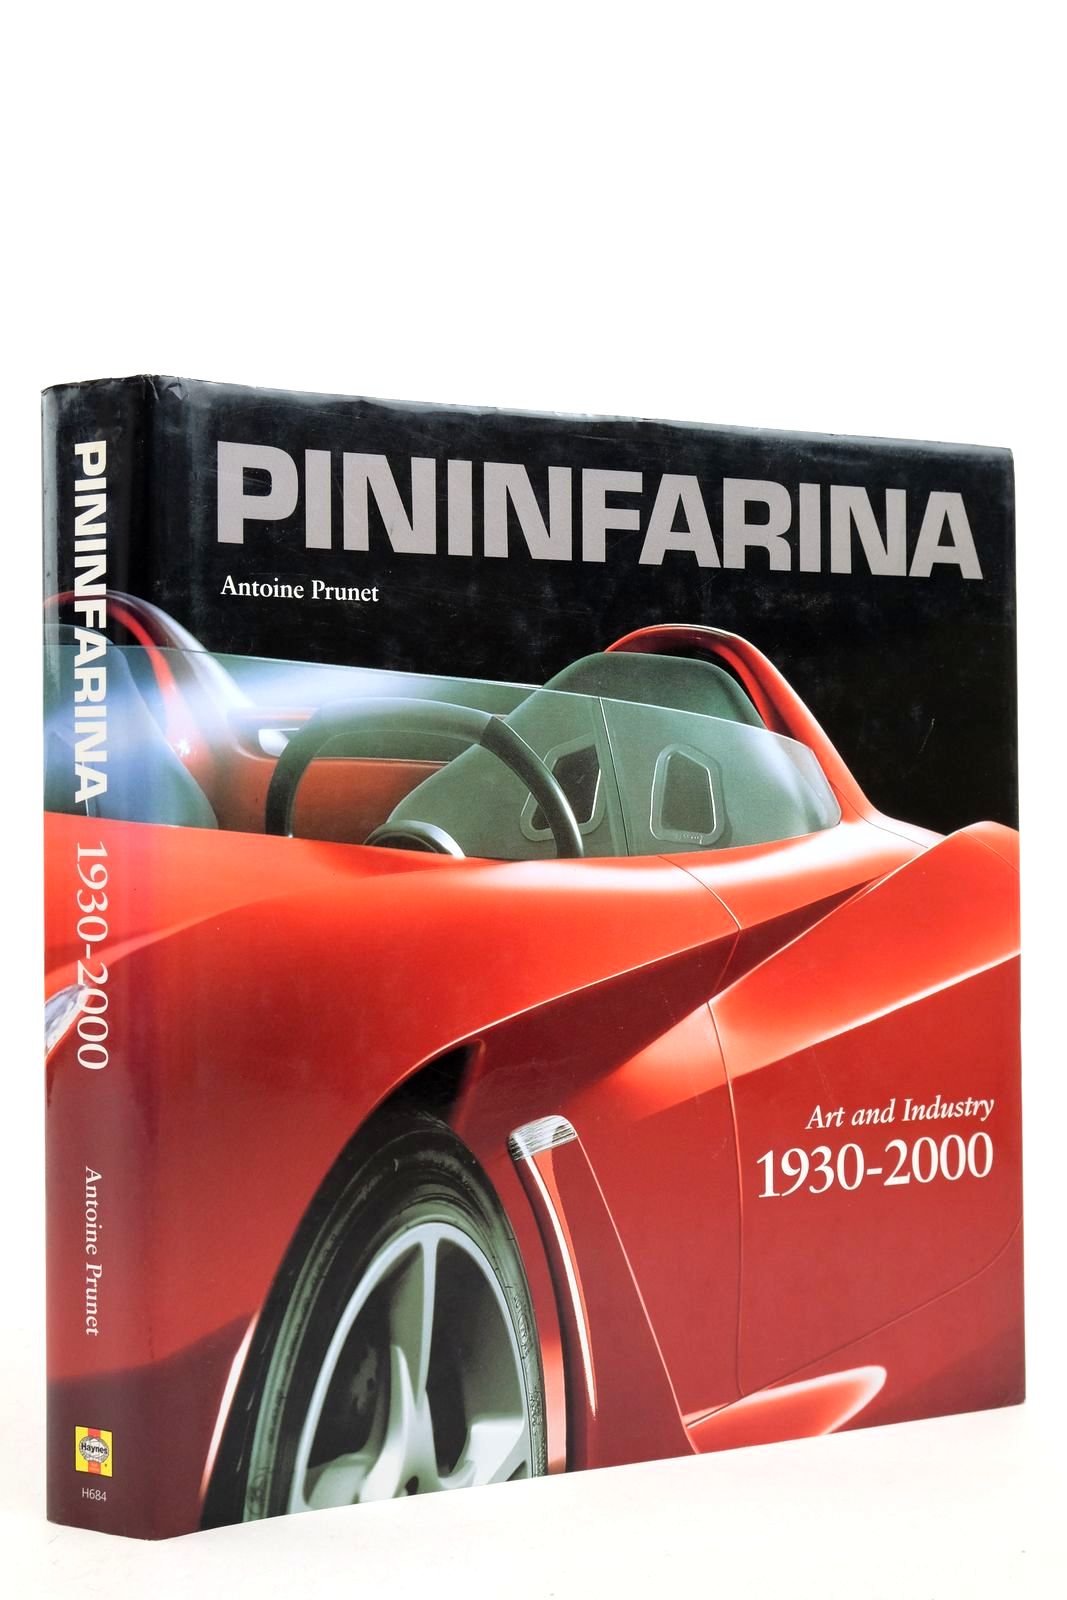 Photo of PININFARINA ART AND INDUSTRY 1930-2000 written by Prunet, Antoine published by Haynes Publishing (STOCK CODE: 2139855)  for sale by Stella & Rose's Books